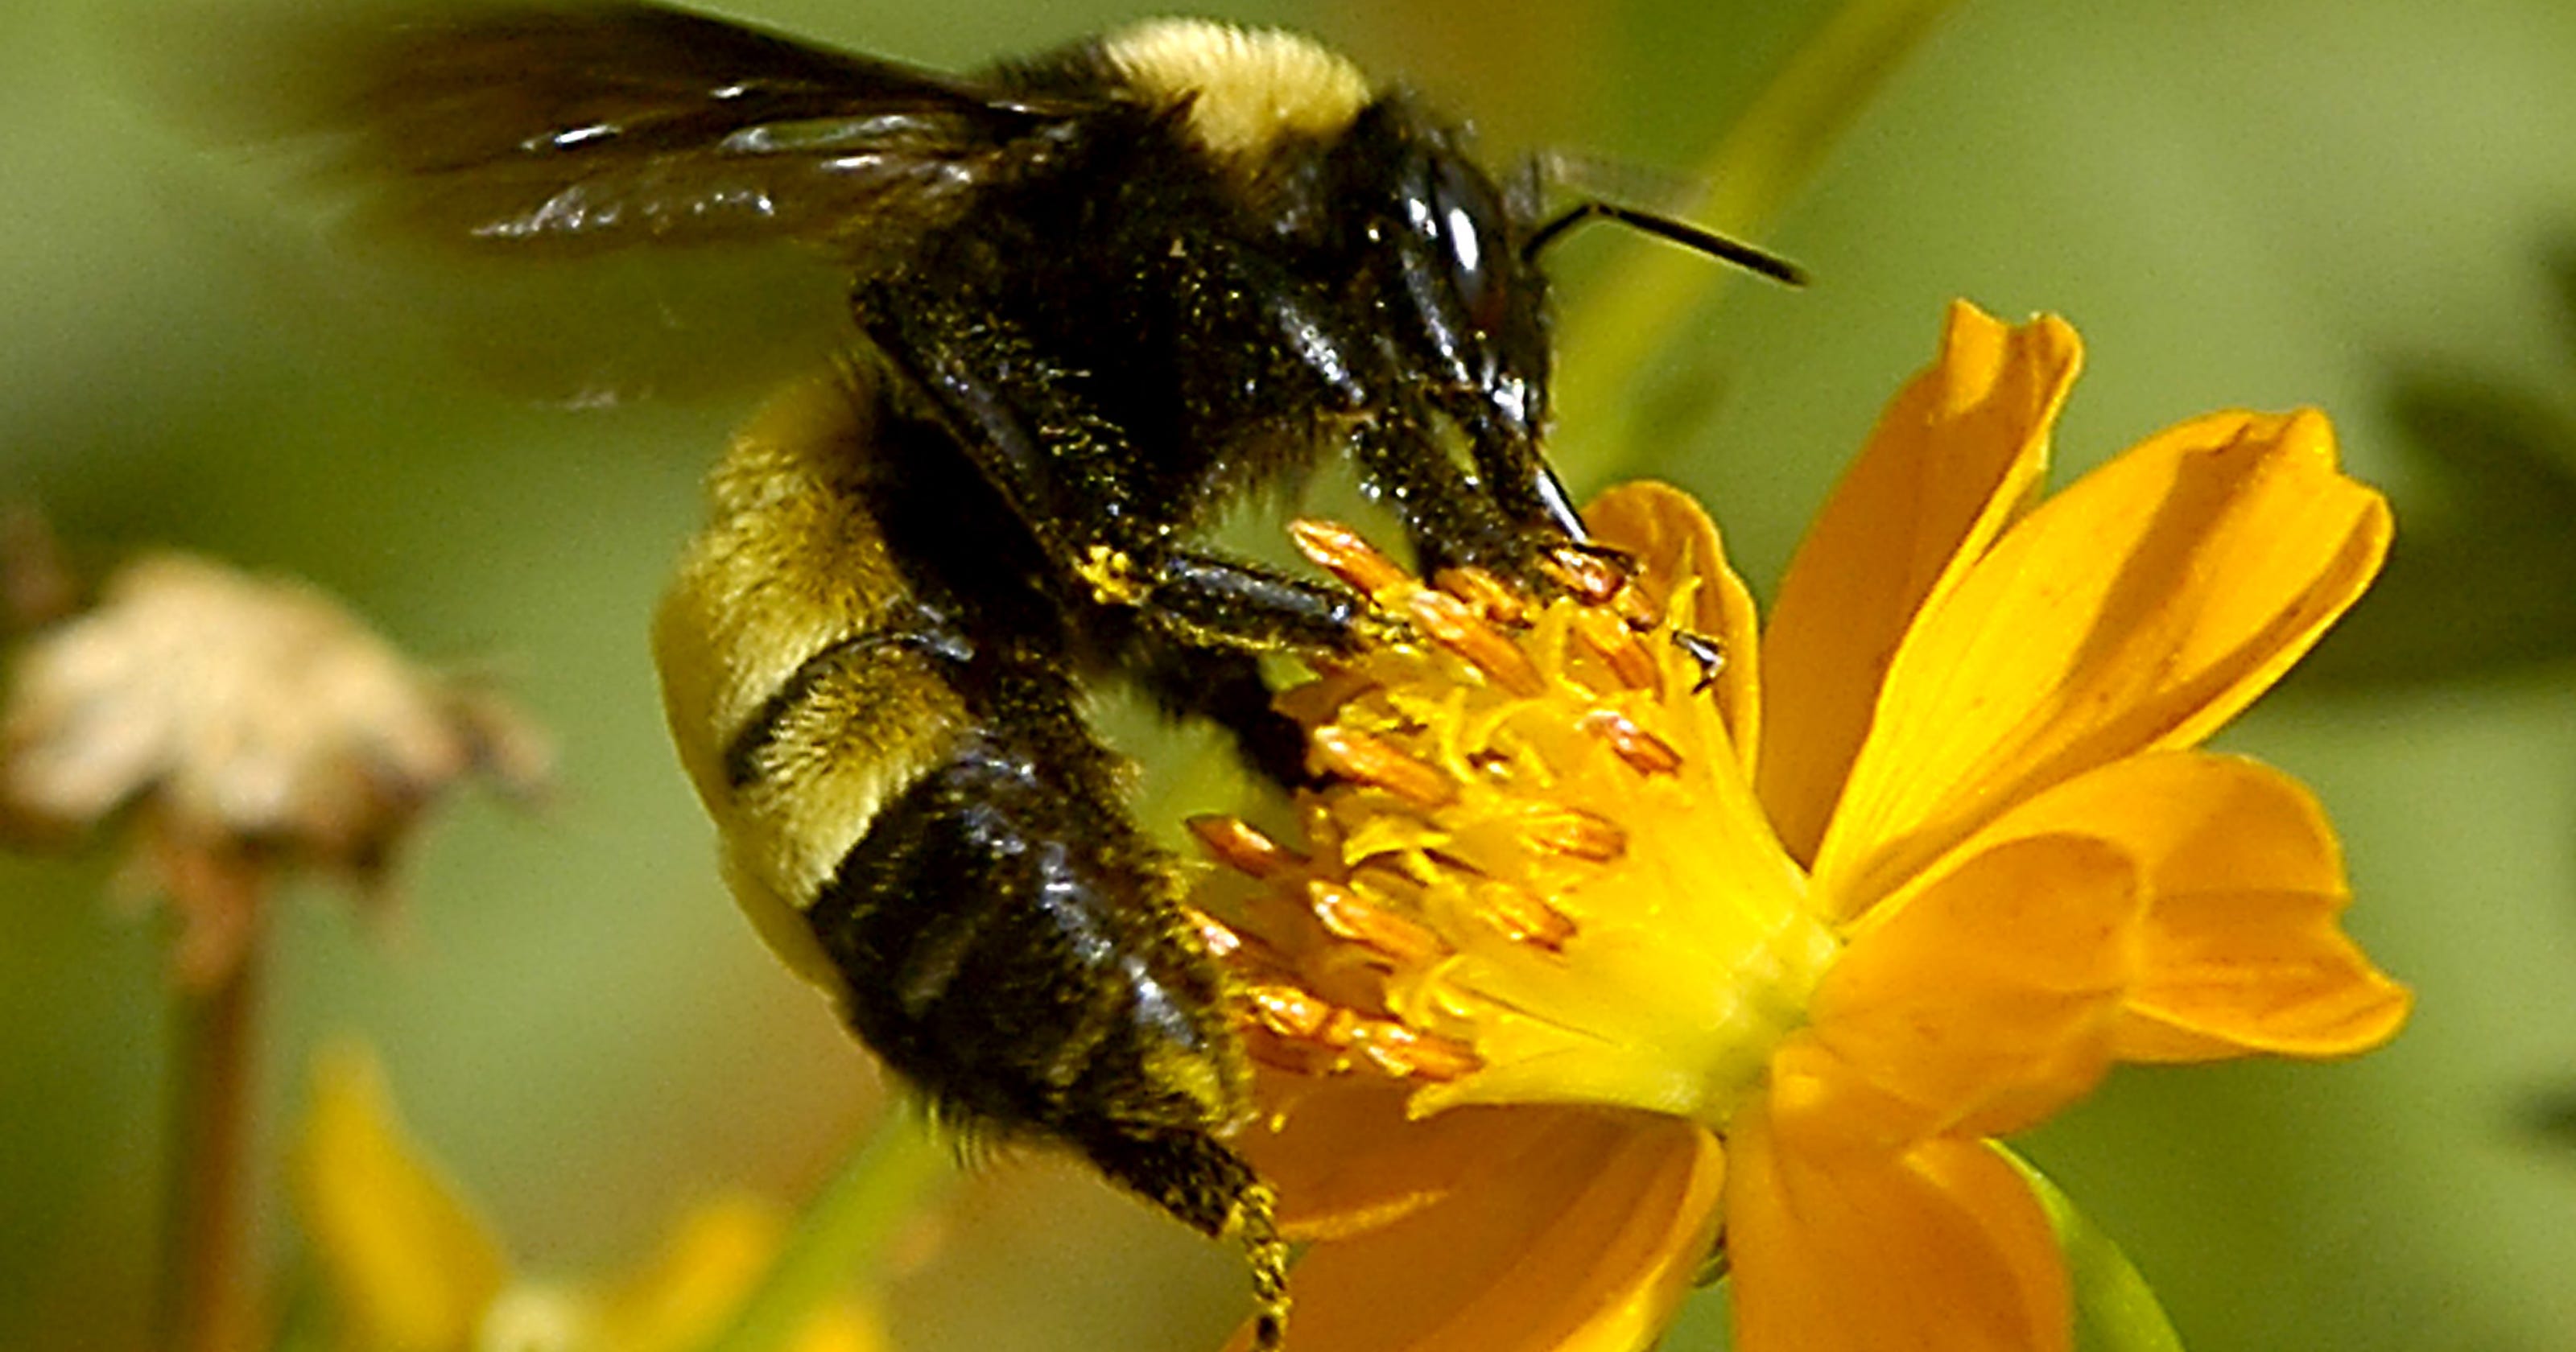 Africanized bees: Safety tips and tricks